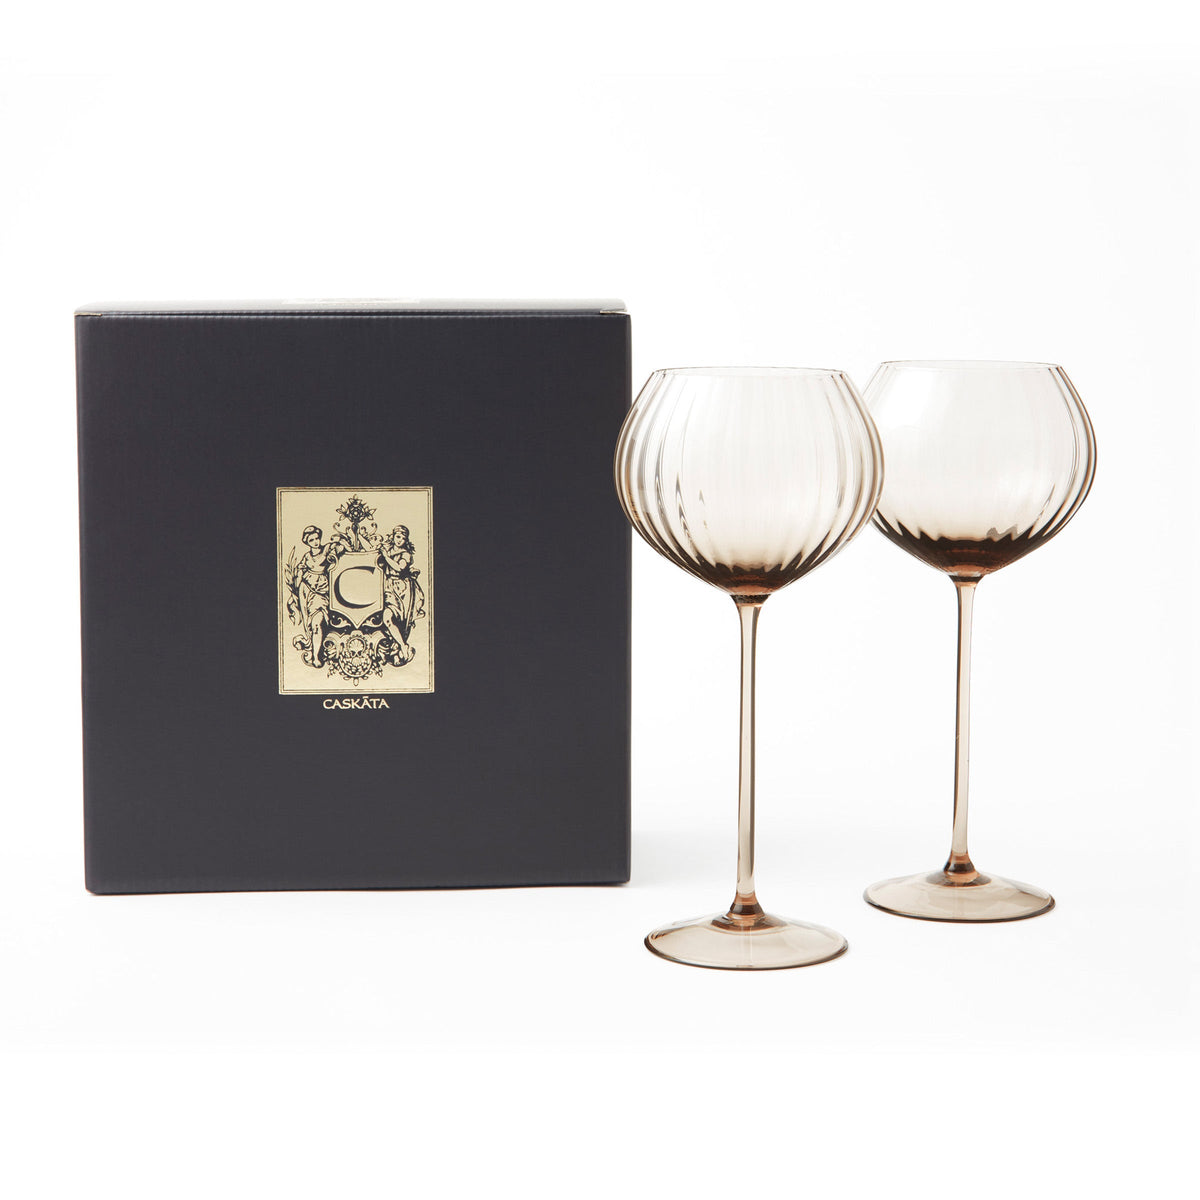 Quinn Mocha Brom Mouth-blown Crystal Red Wine Glasses from Caskata with black and gold gift box